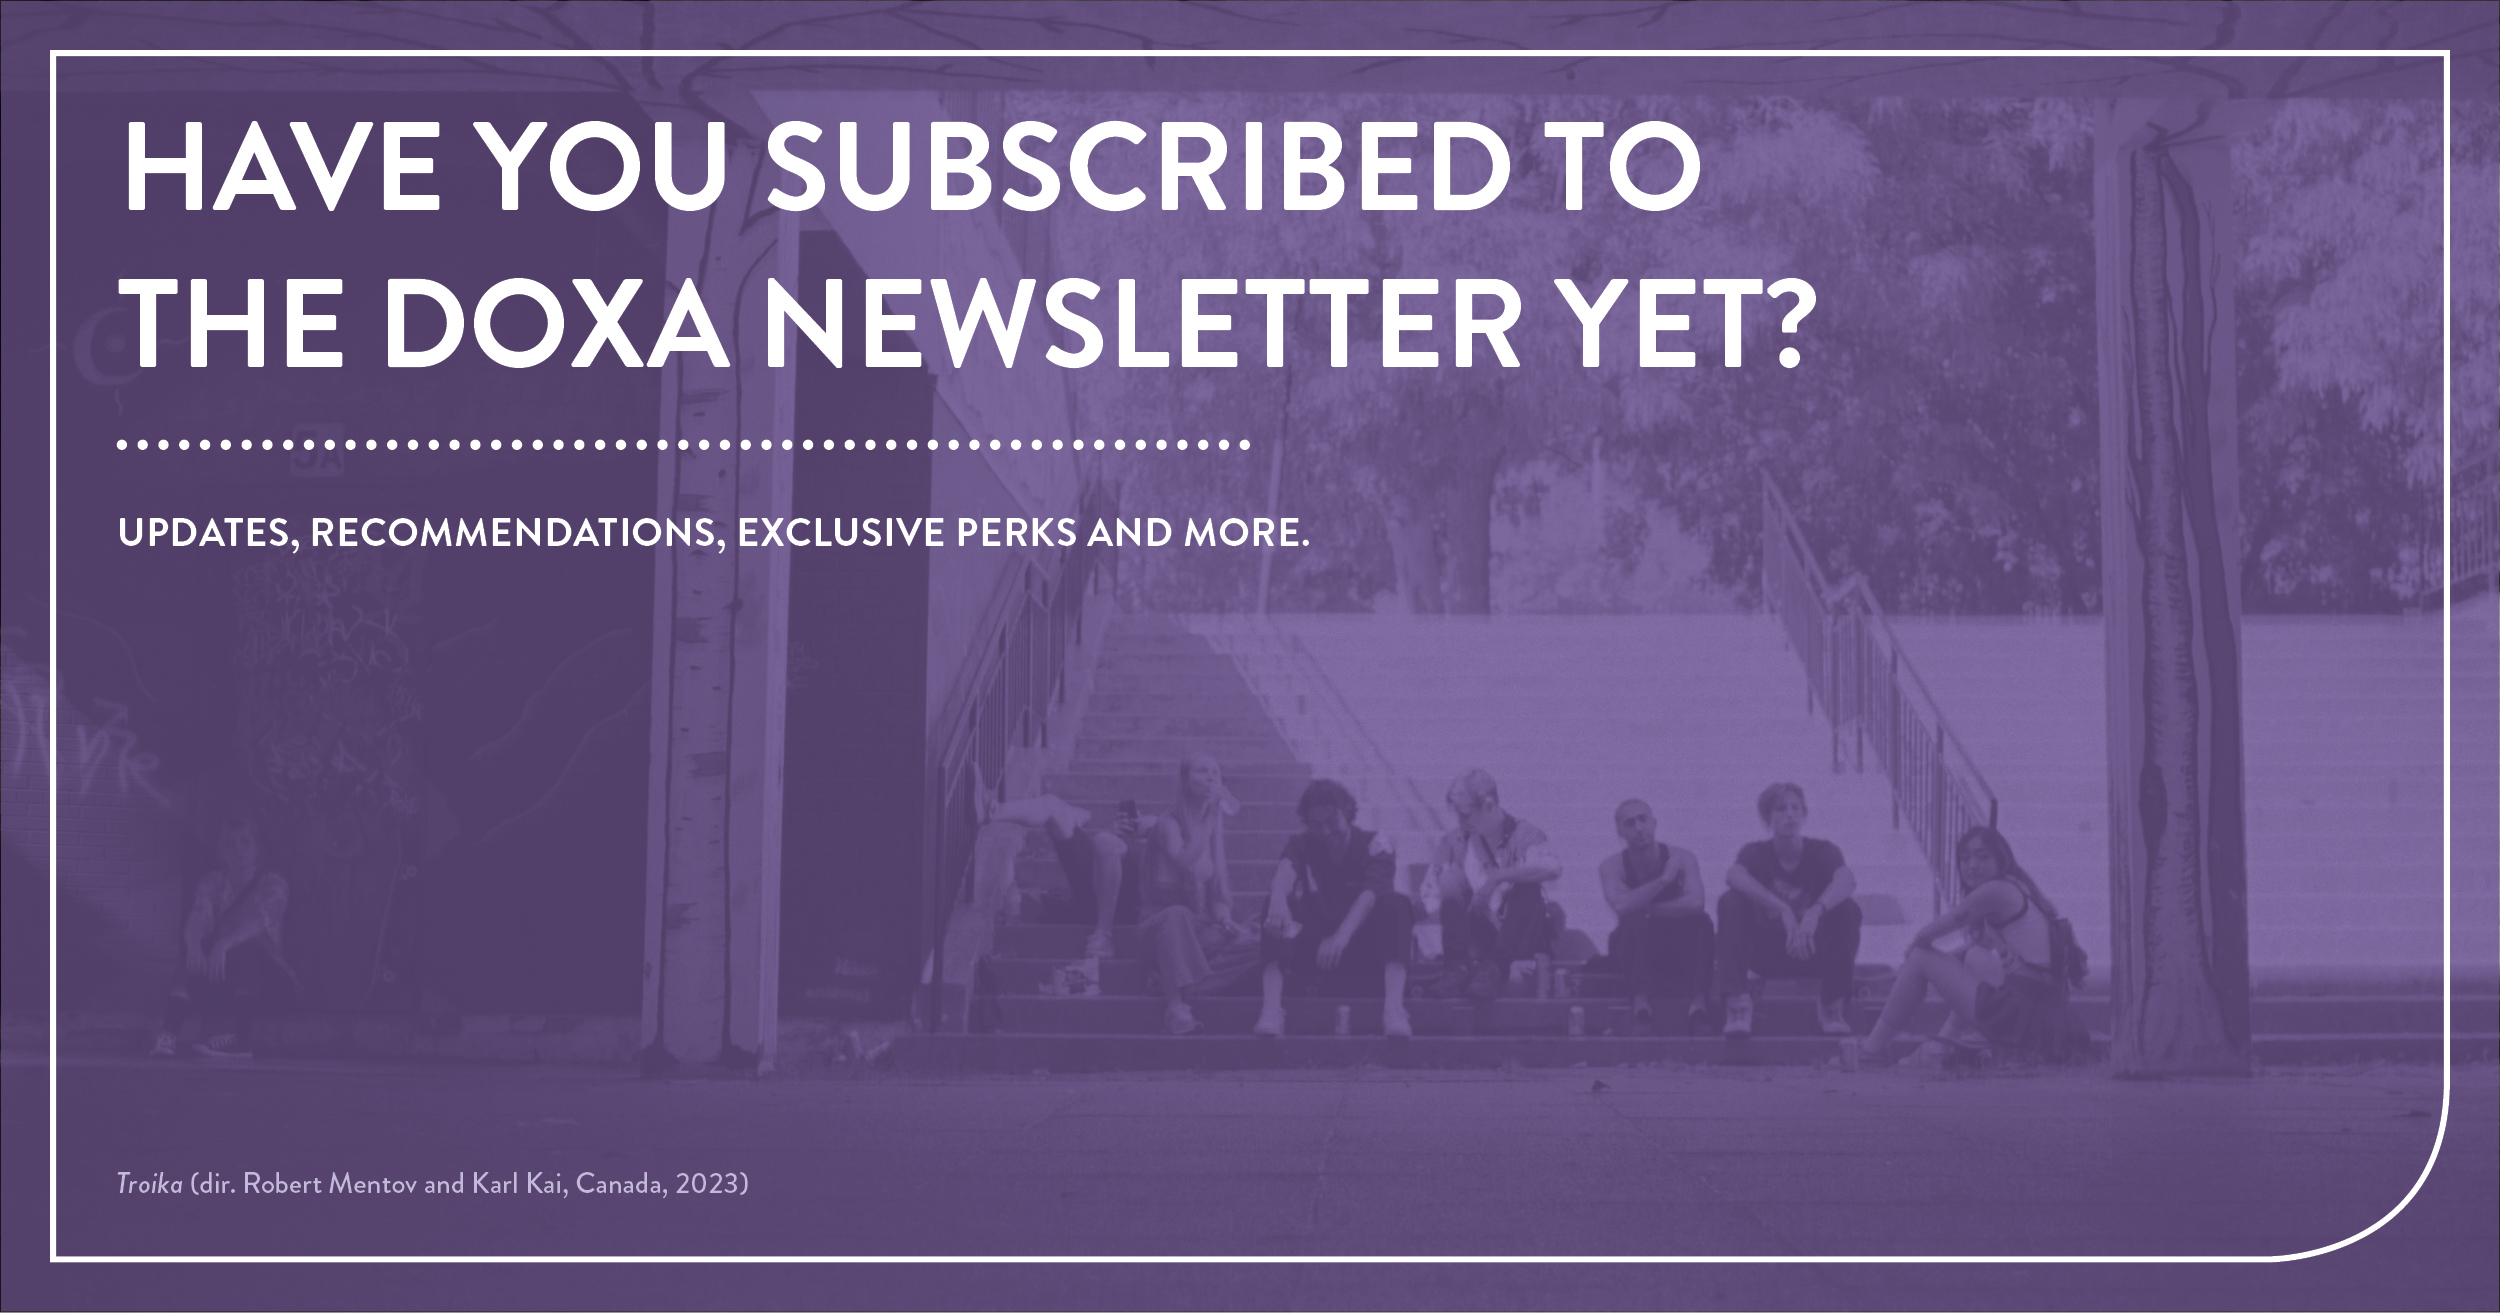 Have You Subscribed to the DOXA Newsletter Yet?